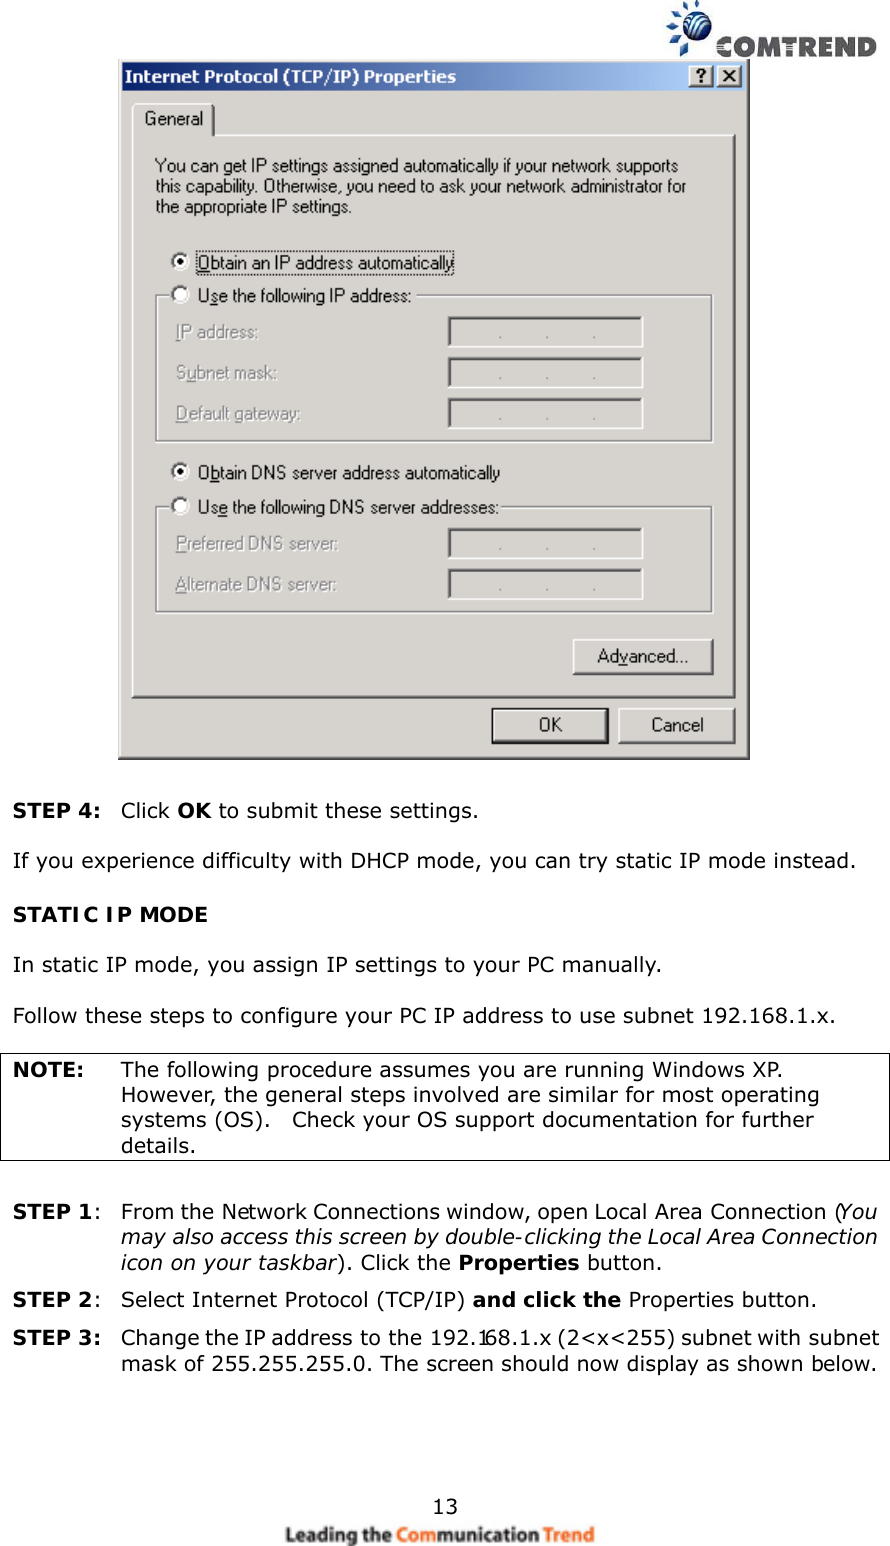    13    STEP 4:  Click OK to submit these settings.  If you experience difficulty with DHCP mode, you can try static IP mode instead. STATIC IP MODE  In static IP mode, you assign IP settings to your PC manually.  Follow these steps to configure your PC IP address to use subnet 192.168.1.x.  NOTE:  The following procedure assumes you are running Windows XP.   However, the general steps involved are similar for most operating systems (OS).    Check your OS support documentation for further details.  STEP 1:  From the Network Connections window, open Local Area Connection (You may also access this screen by double-clicking the Local Area Connection icon on your taskbar). Click the Properties button. STEP 2:  Select Internet Protocol (TCP/IP) and click the Properties button.     STEP 3:  Change the IP address to the 192.168.1.x (2&lt;x&lt;255) subnet with subnet mask of 255.255.255.0. The screen should now display as shown below.   